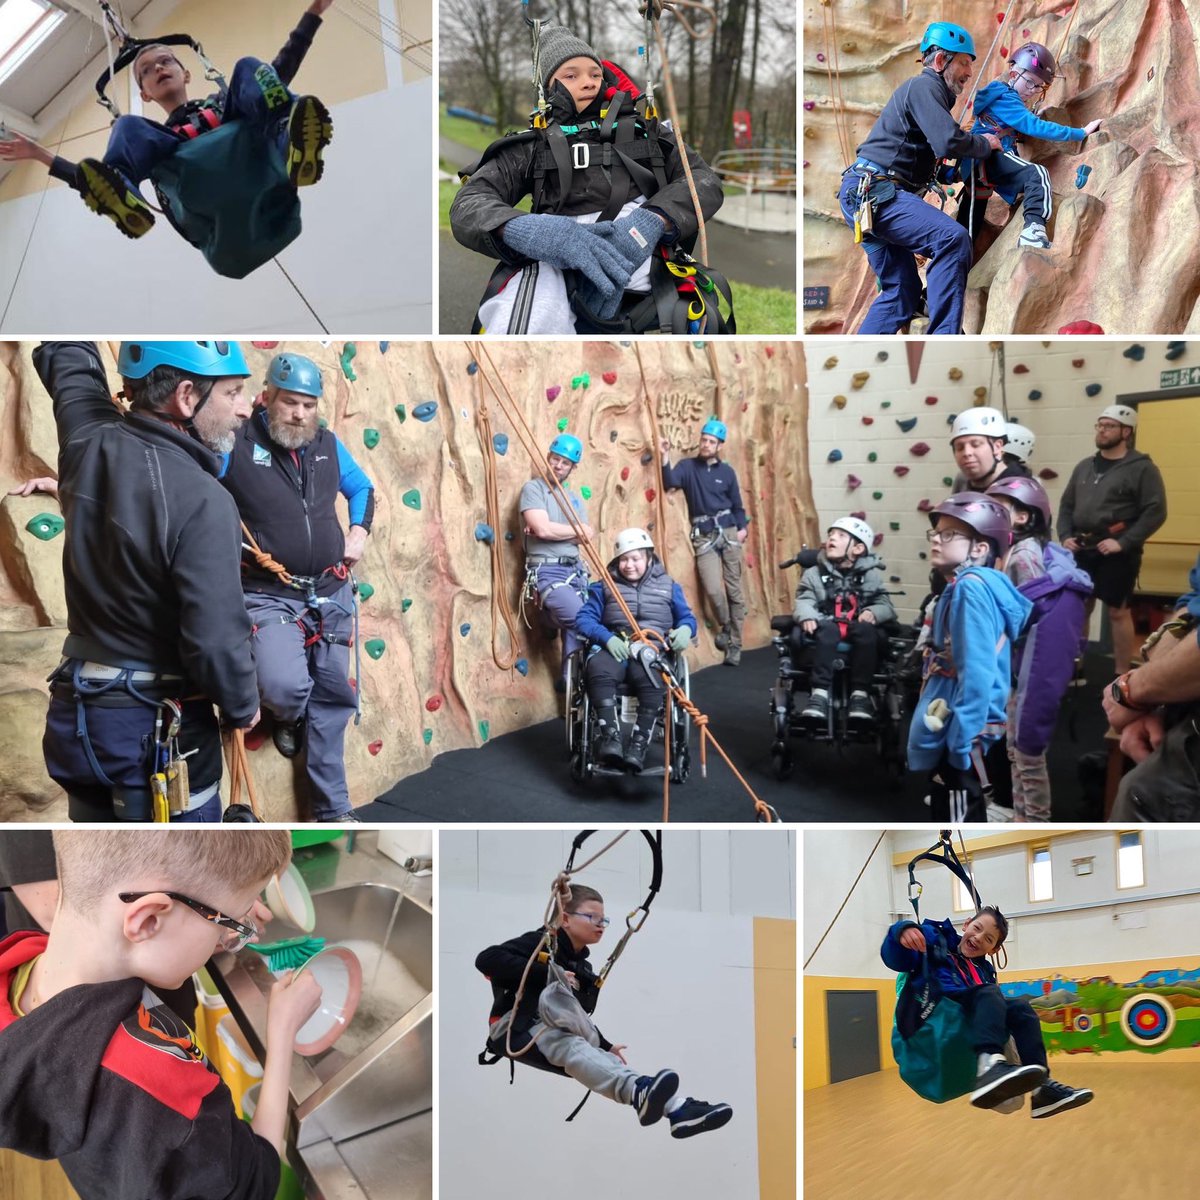 Day 3 - More action from @BendriggTrust - Canoeing today on the canal, rock climbing and more dare devil zip wires followed by a more relaxed movie night